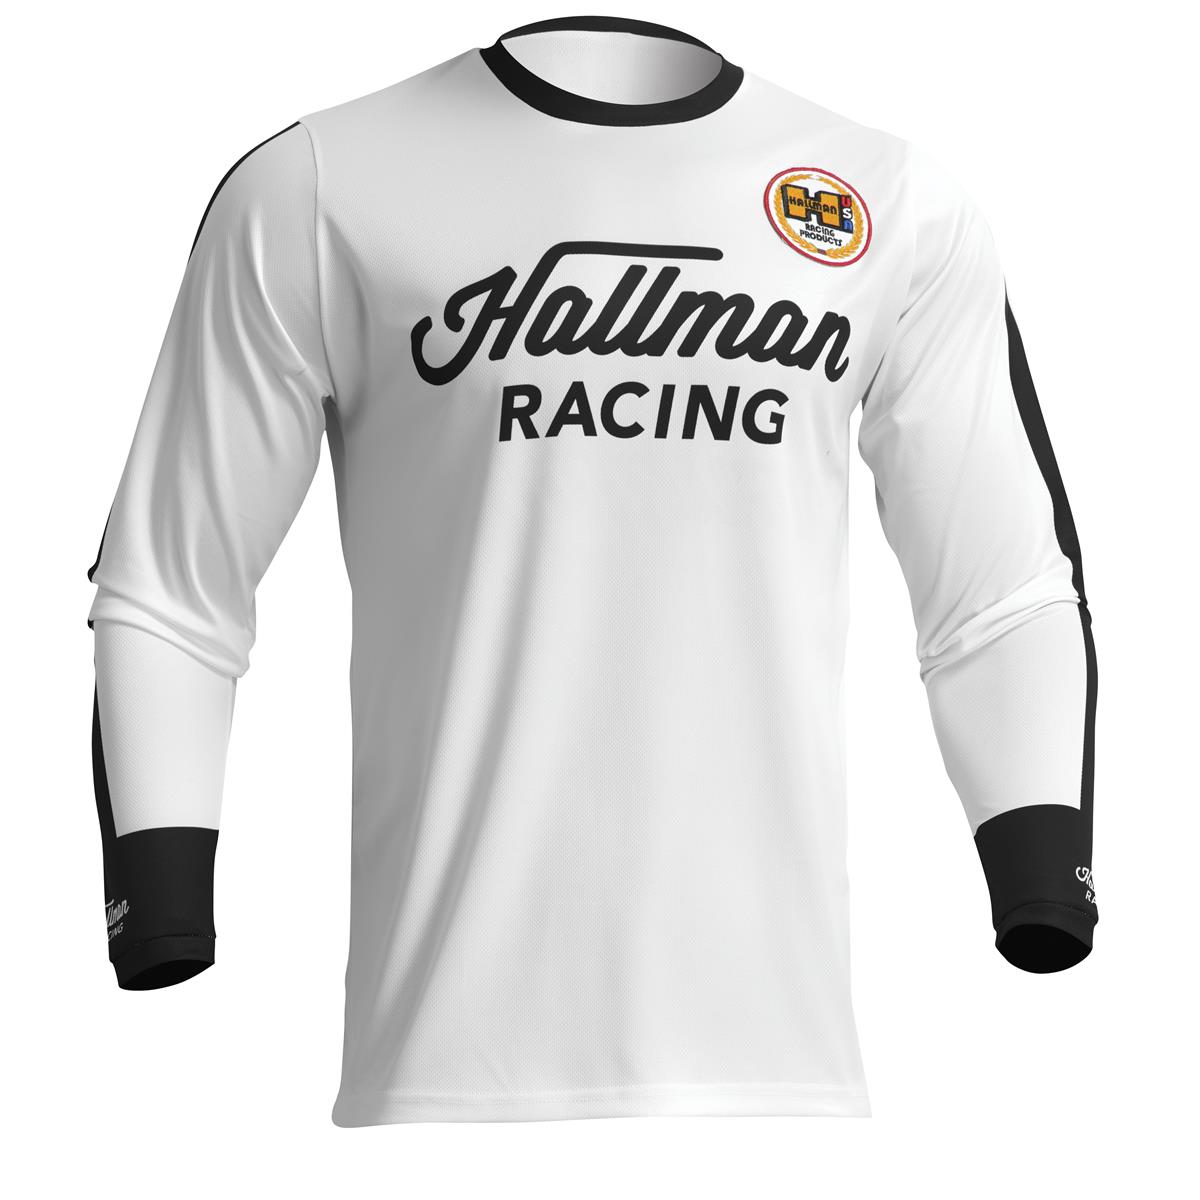 Thor Maglie MX Differ Roosted - Bianco/Nero